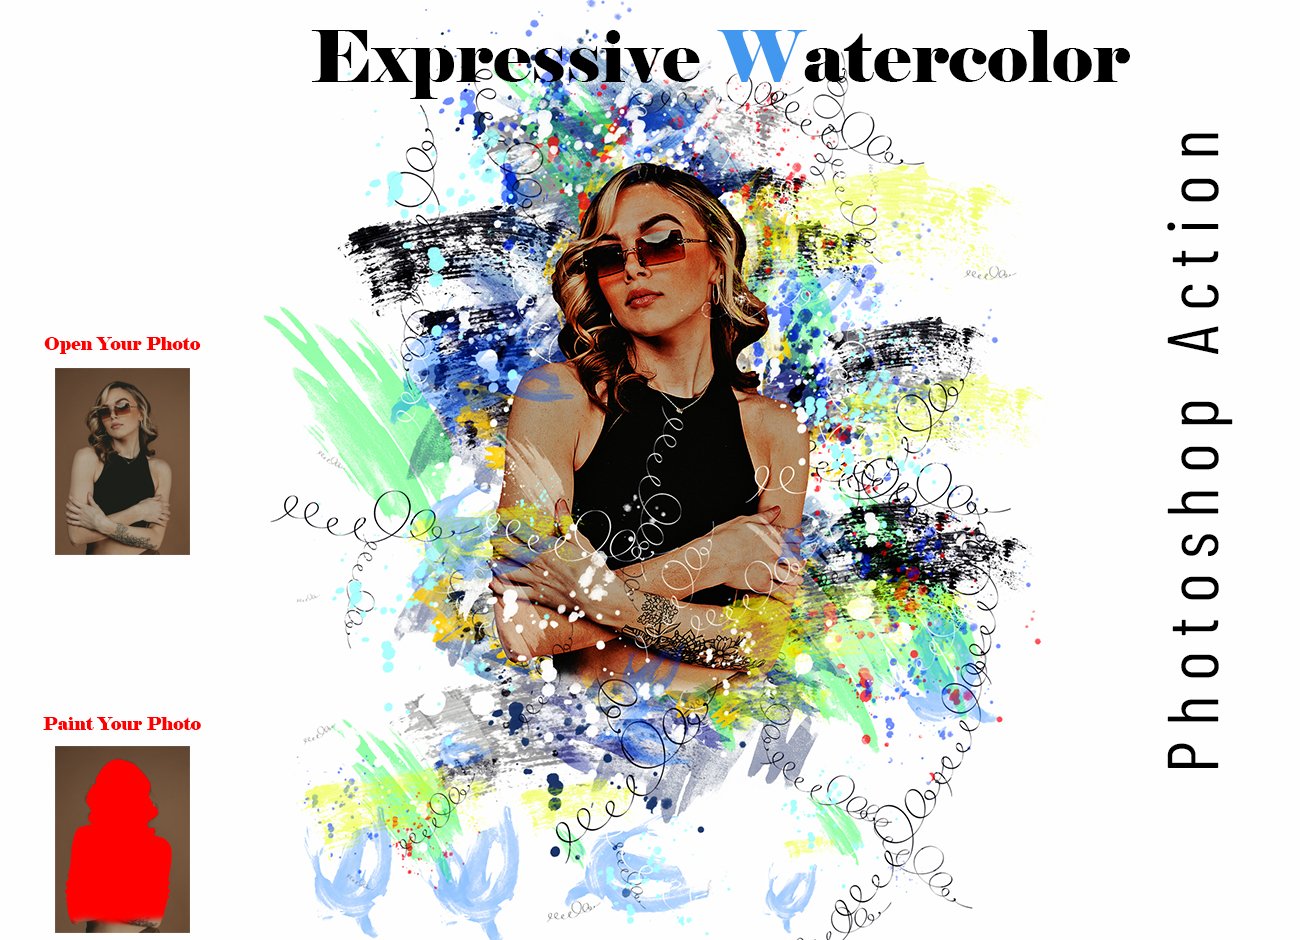 Expressive Watercolor PS Actioncover image.